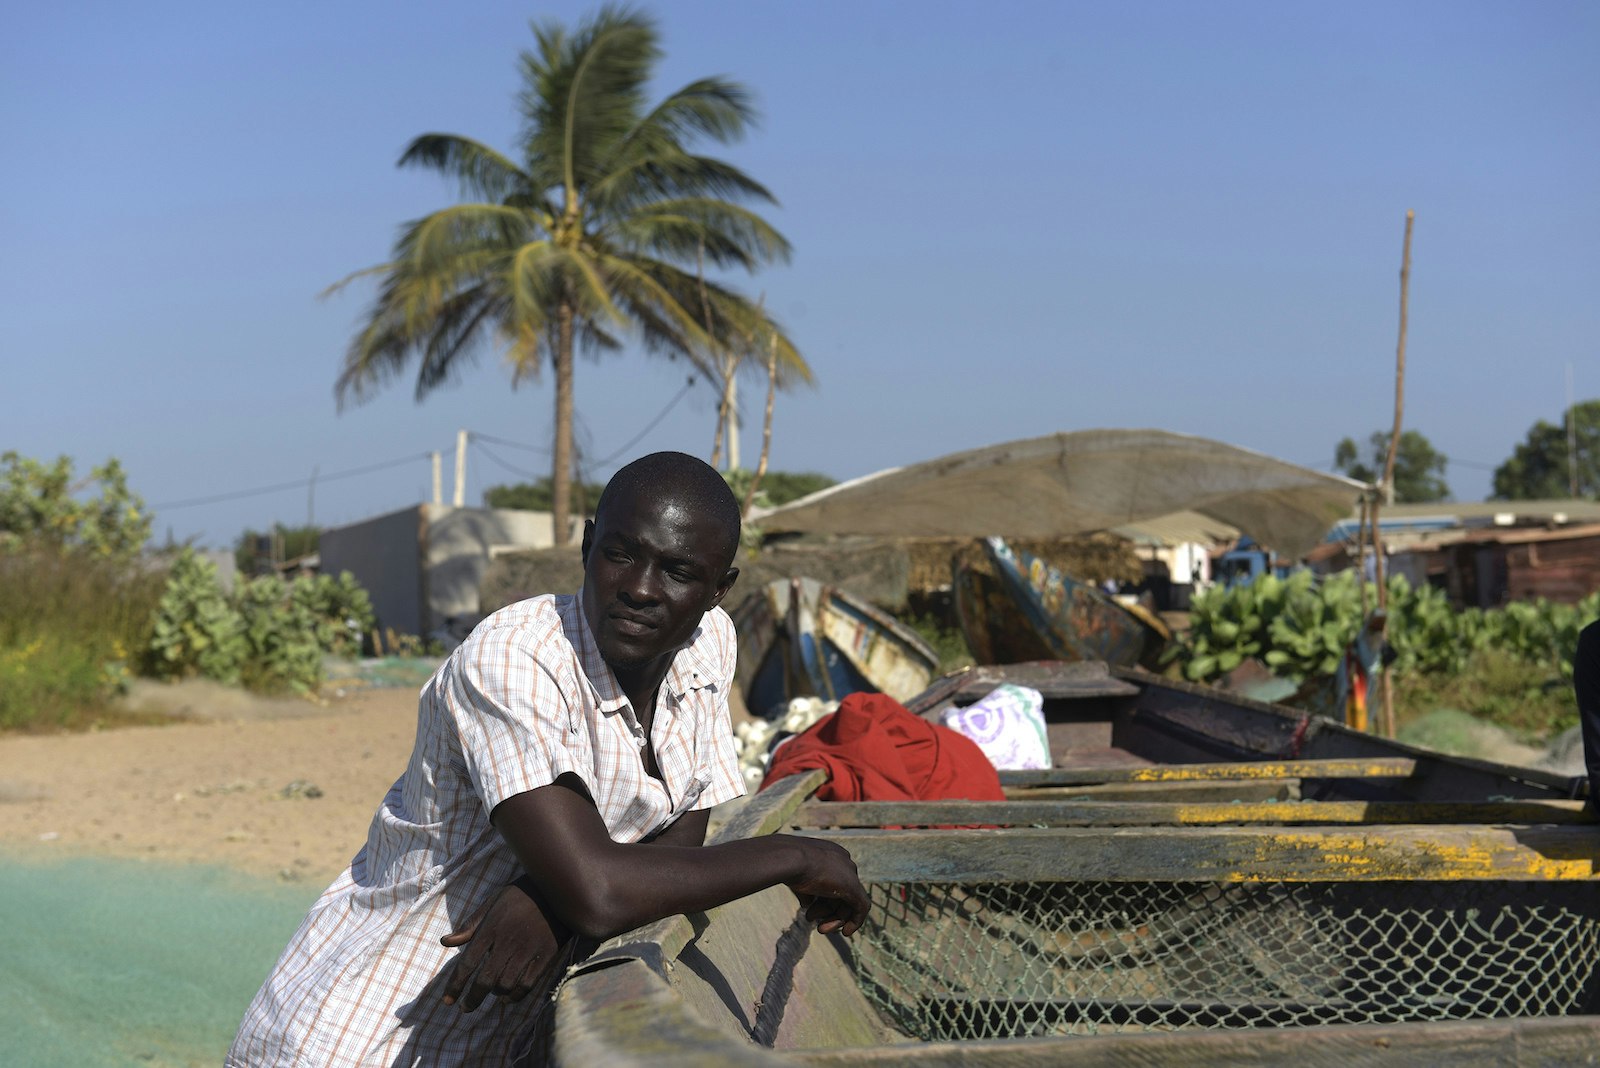 Gambian man poses next to a dugout with other colorful pirogues and a palm tree behind him